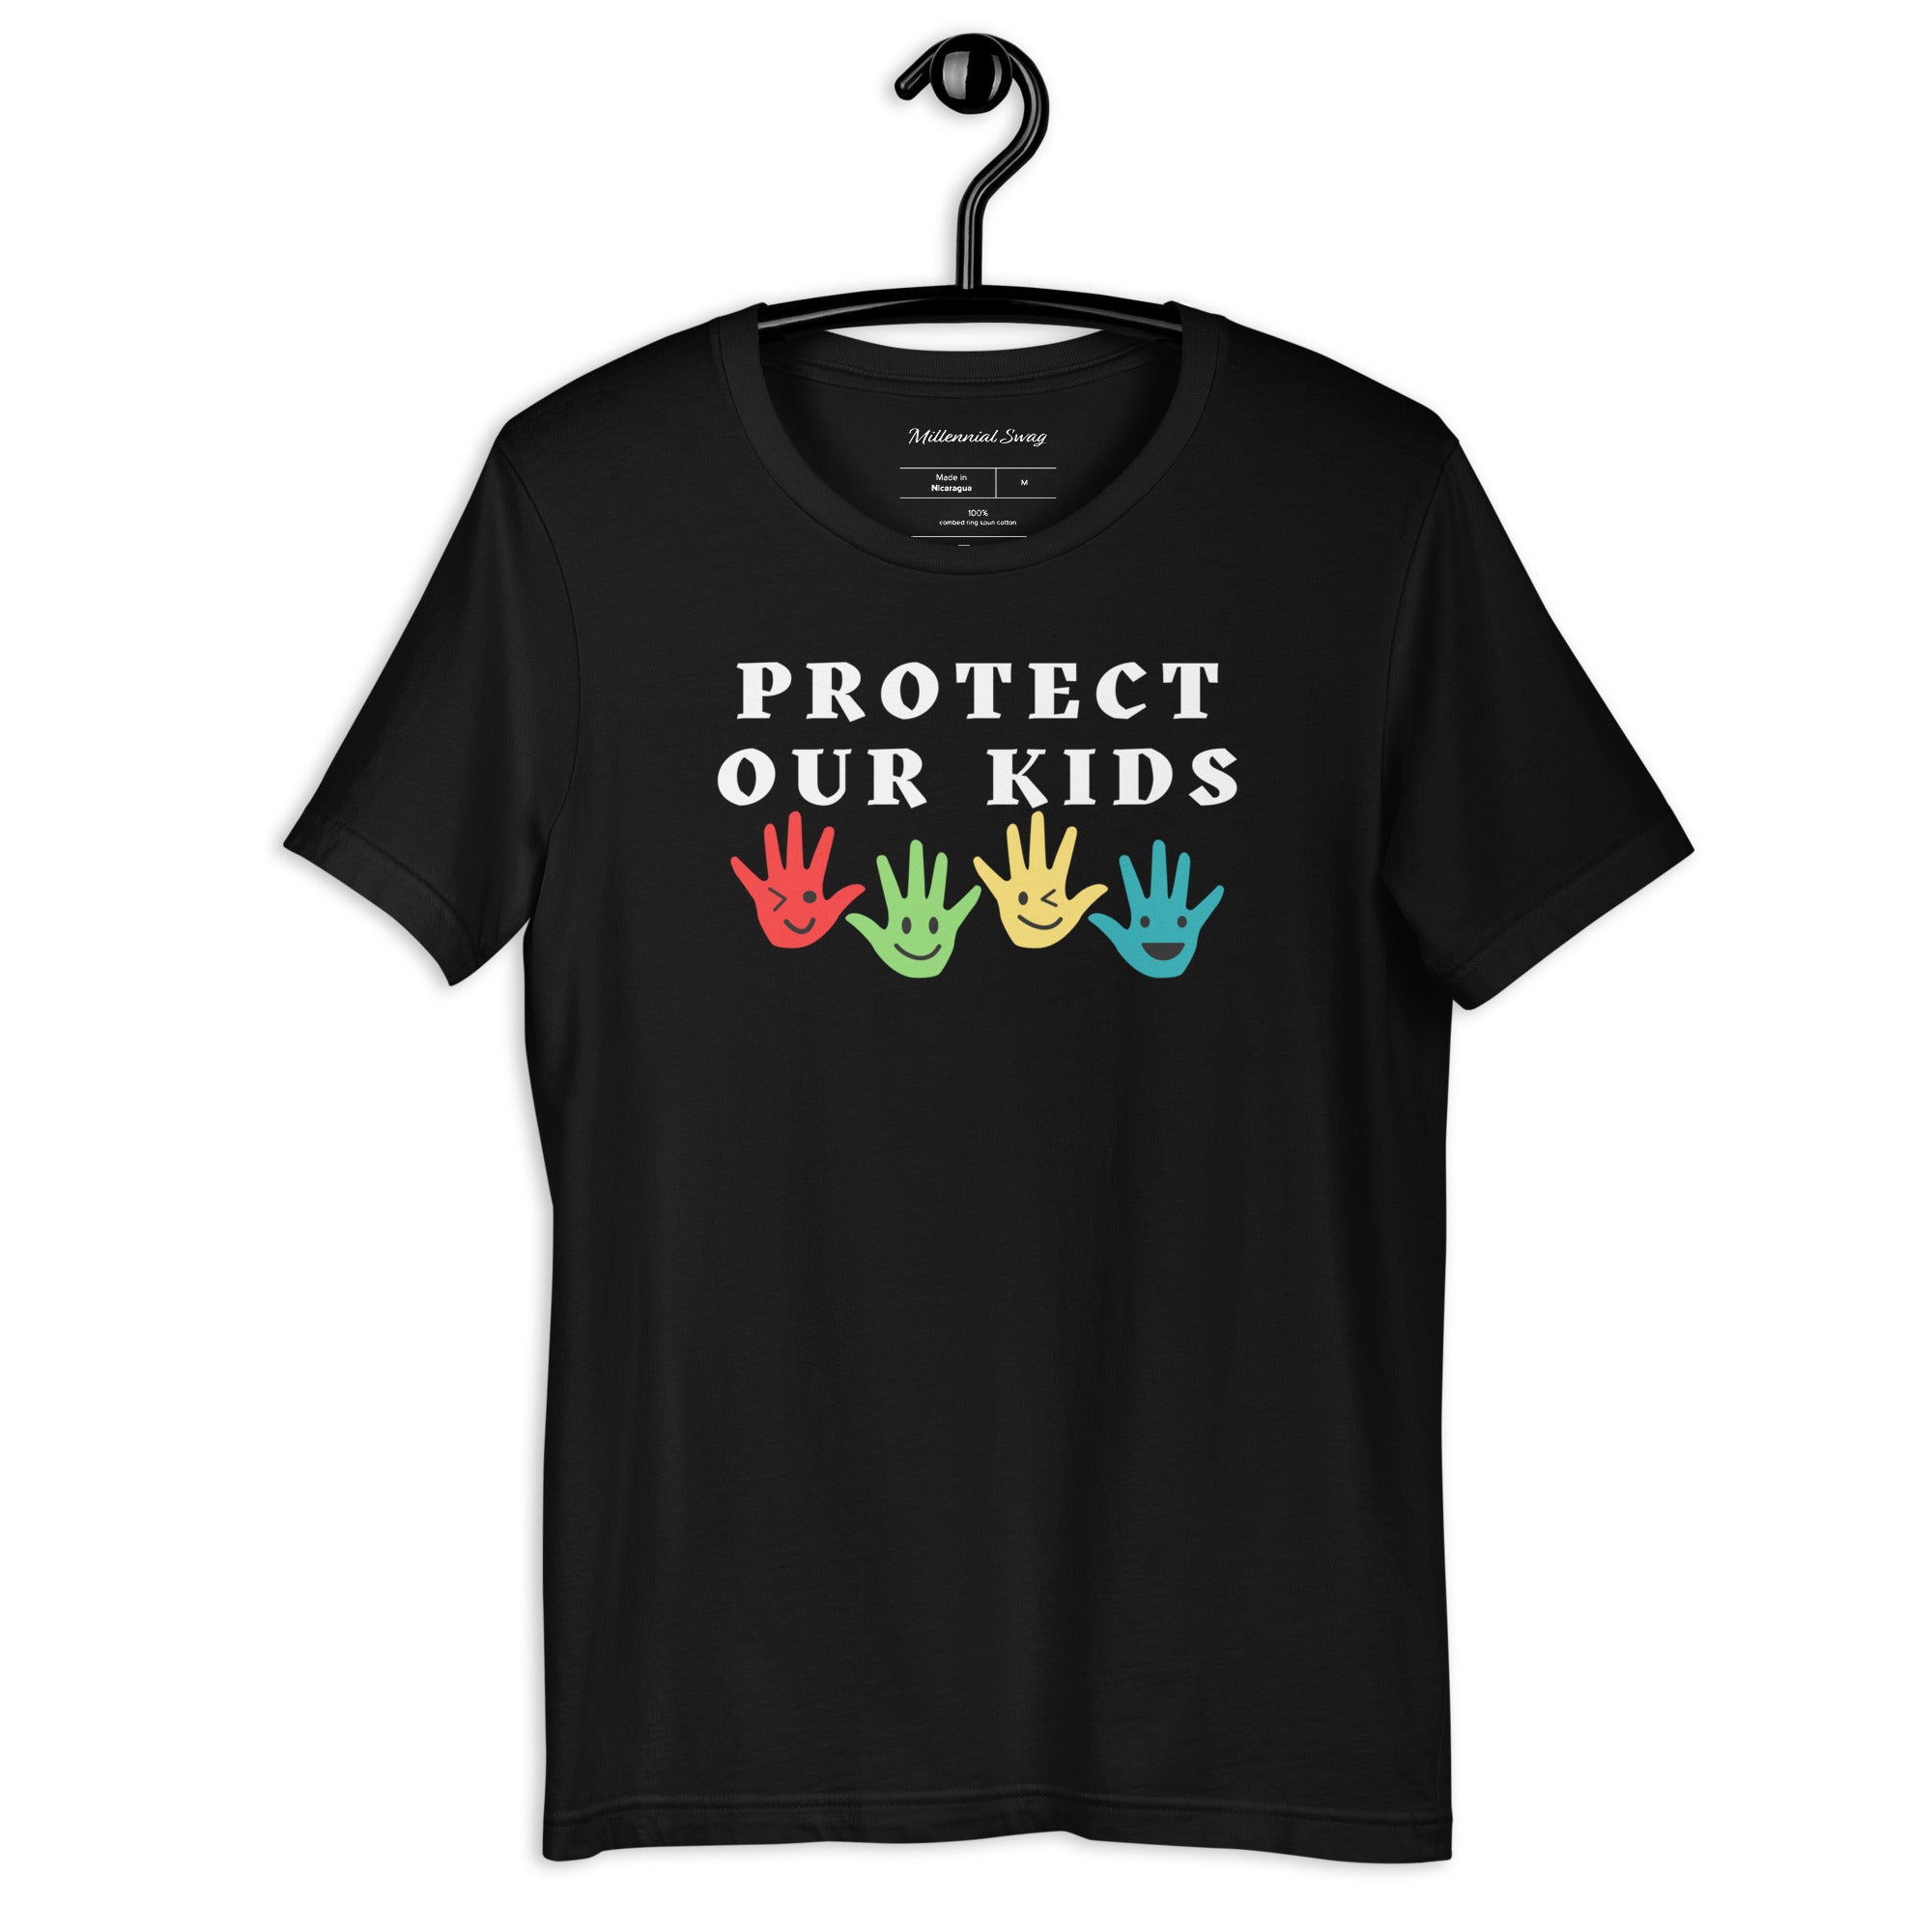 Protect Our Kids T-Shirt - Millennial Swag